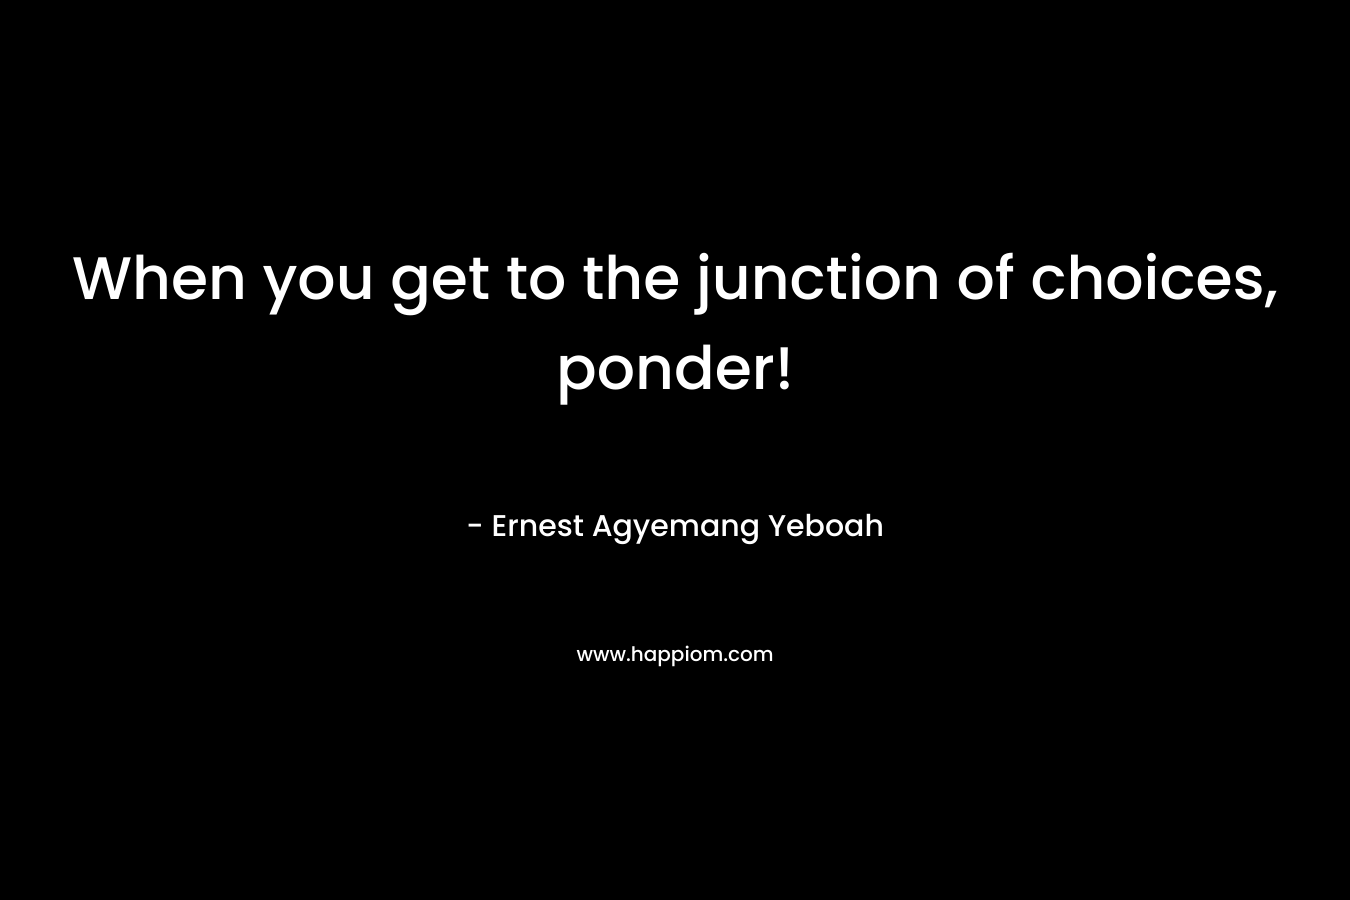 When you get to the junction of choices, ponder! – Ernest Agyemang Yeboah